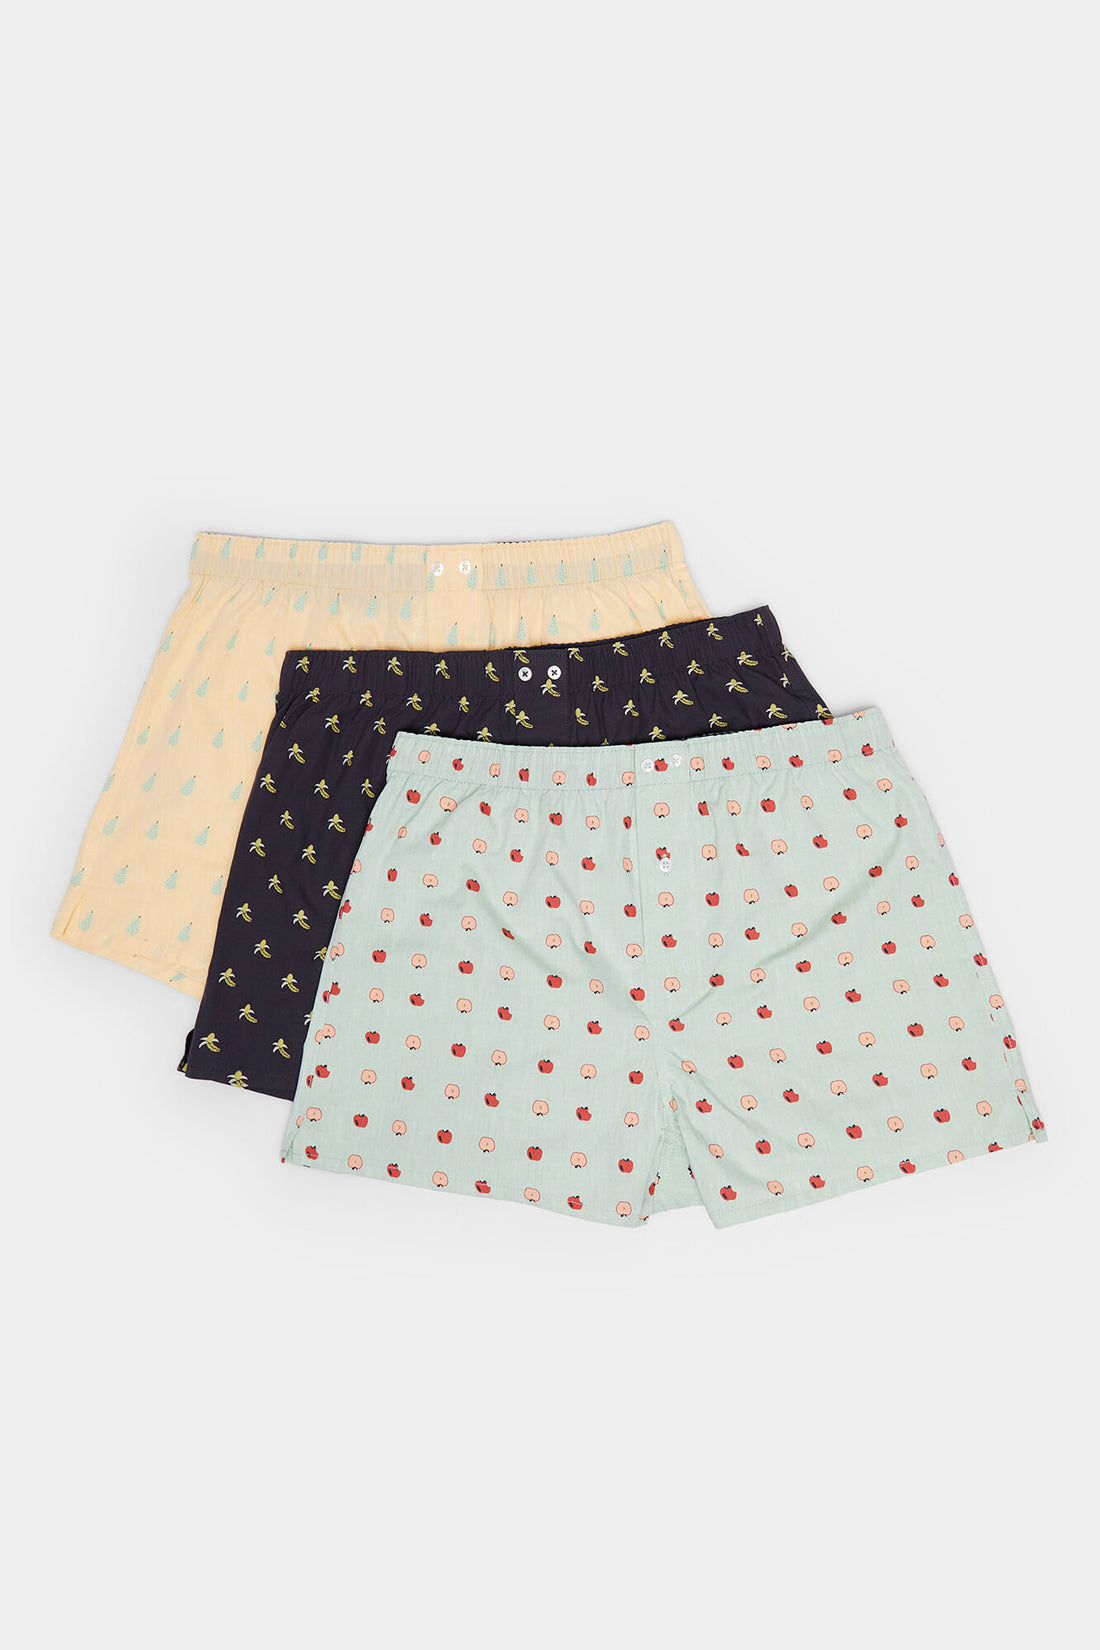 Pack Patterned Boxers_1167483_05_01